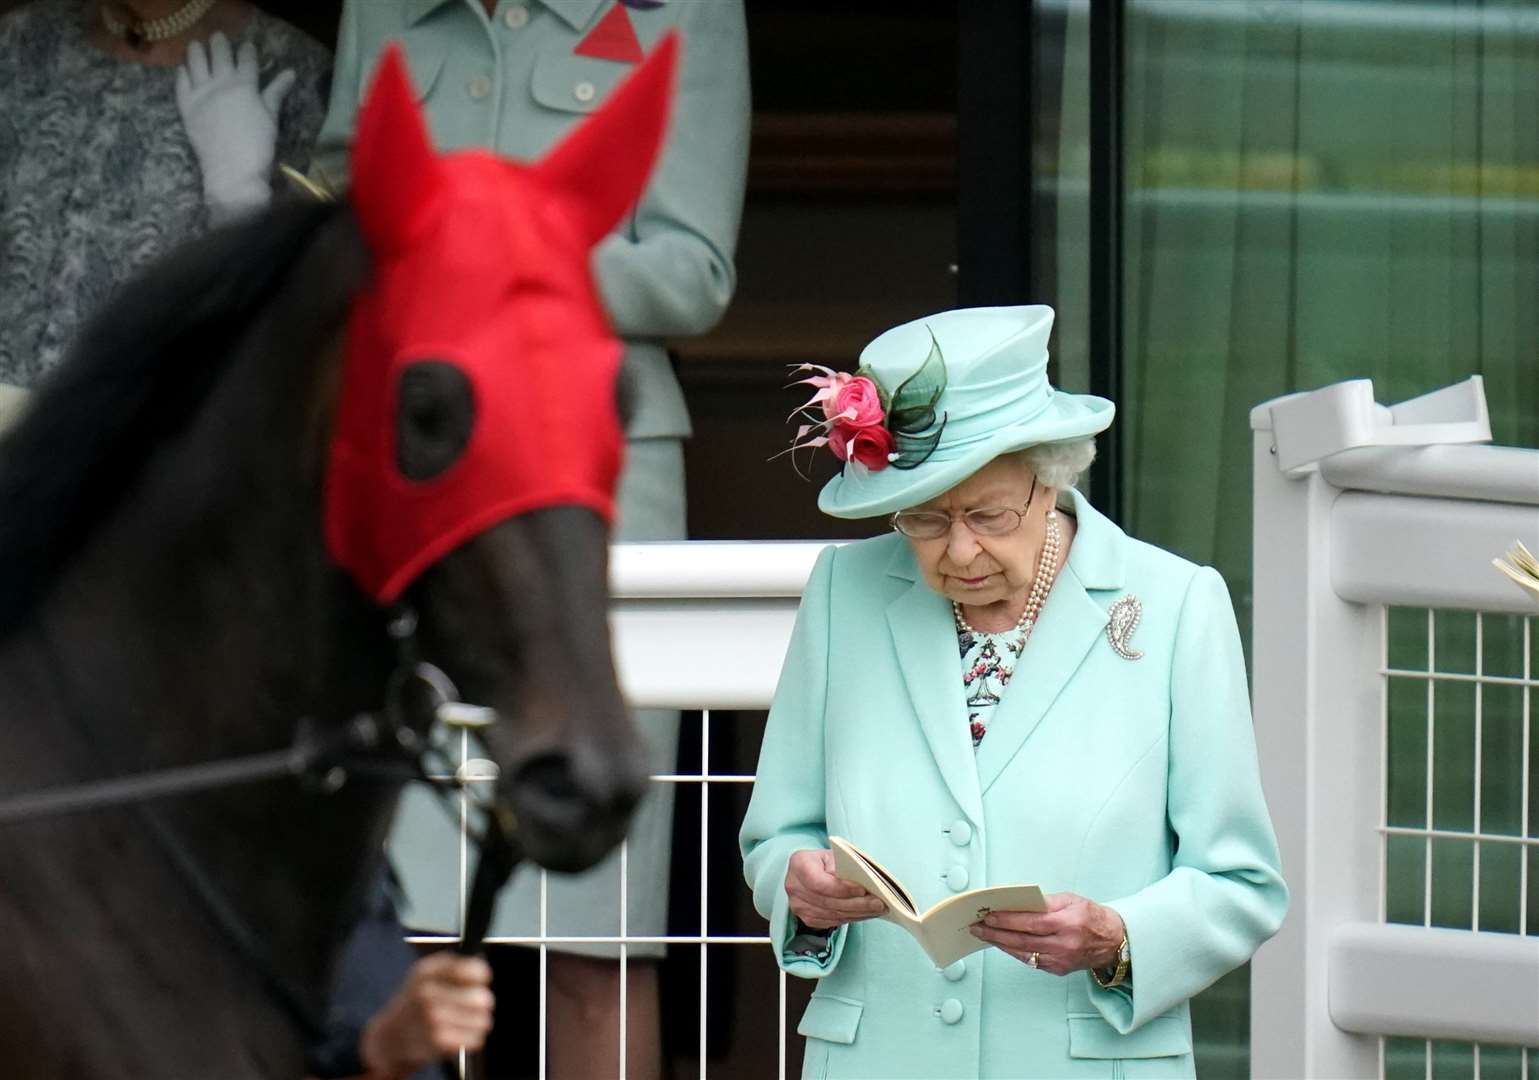 The Queen inspects horses at Ascot (Andrew Matthews/PA)